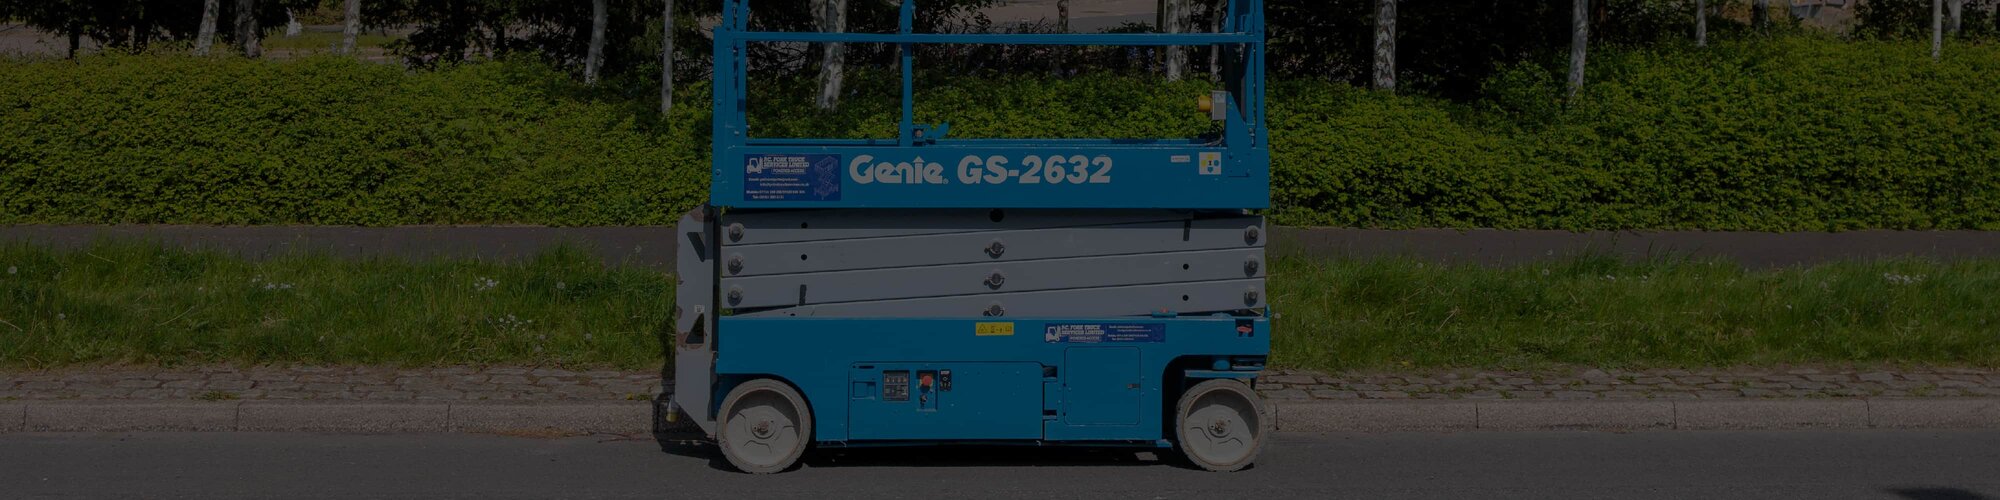 A Genie GS-2632 scissor lift sitting along a curb in front of grass